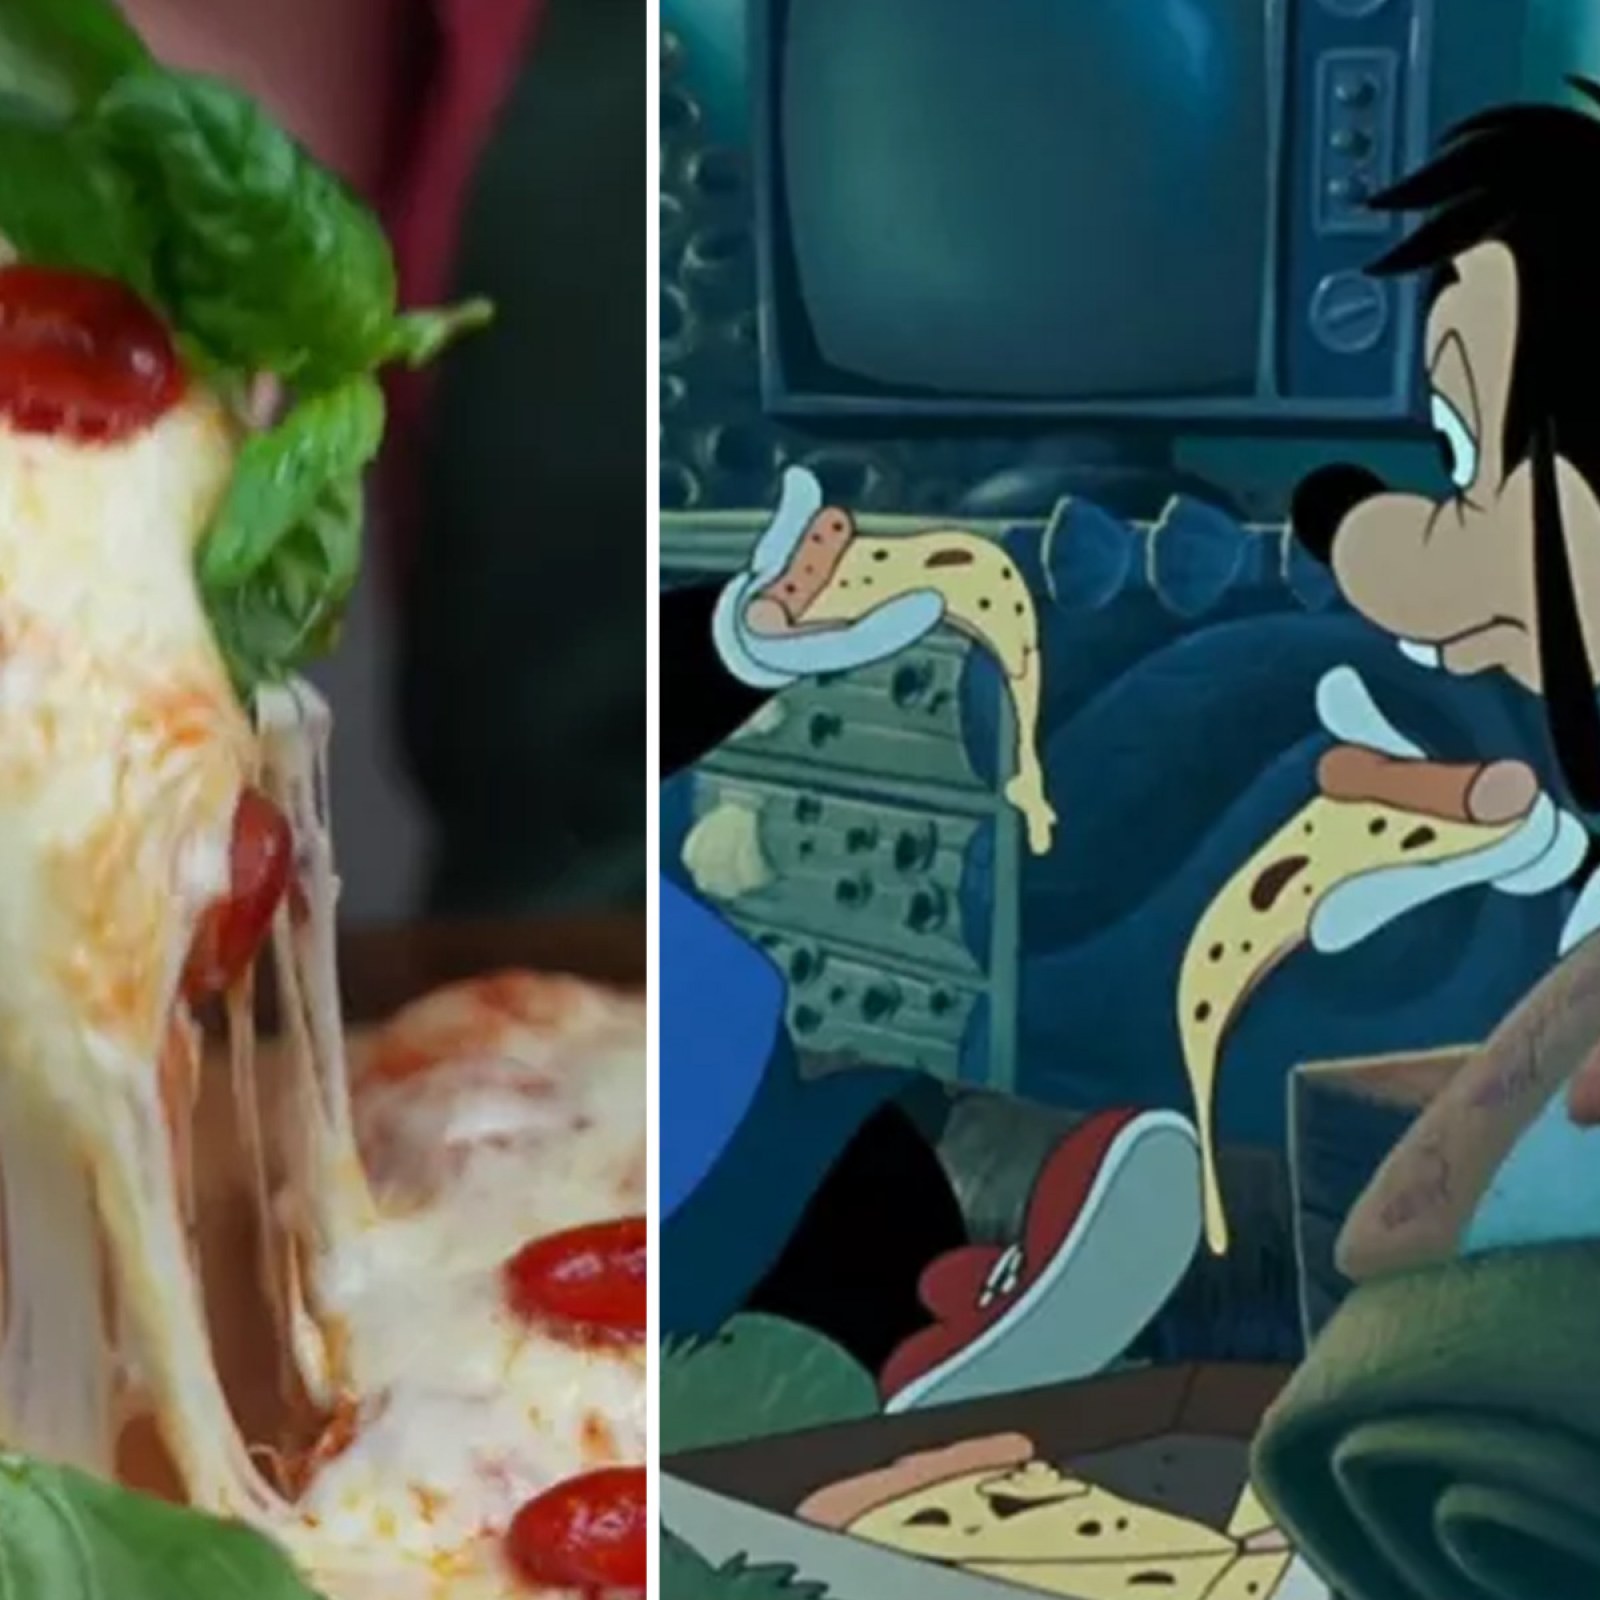 Chef Recreates Cheesy Pizza from Classic Disney Movie: 'Looks Beyond Good'